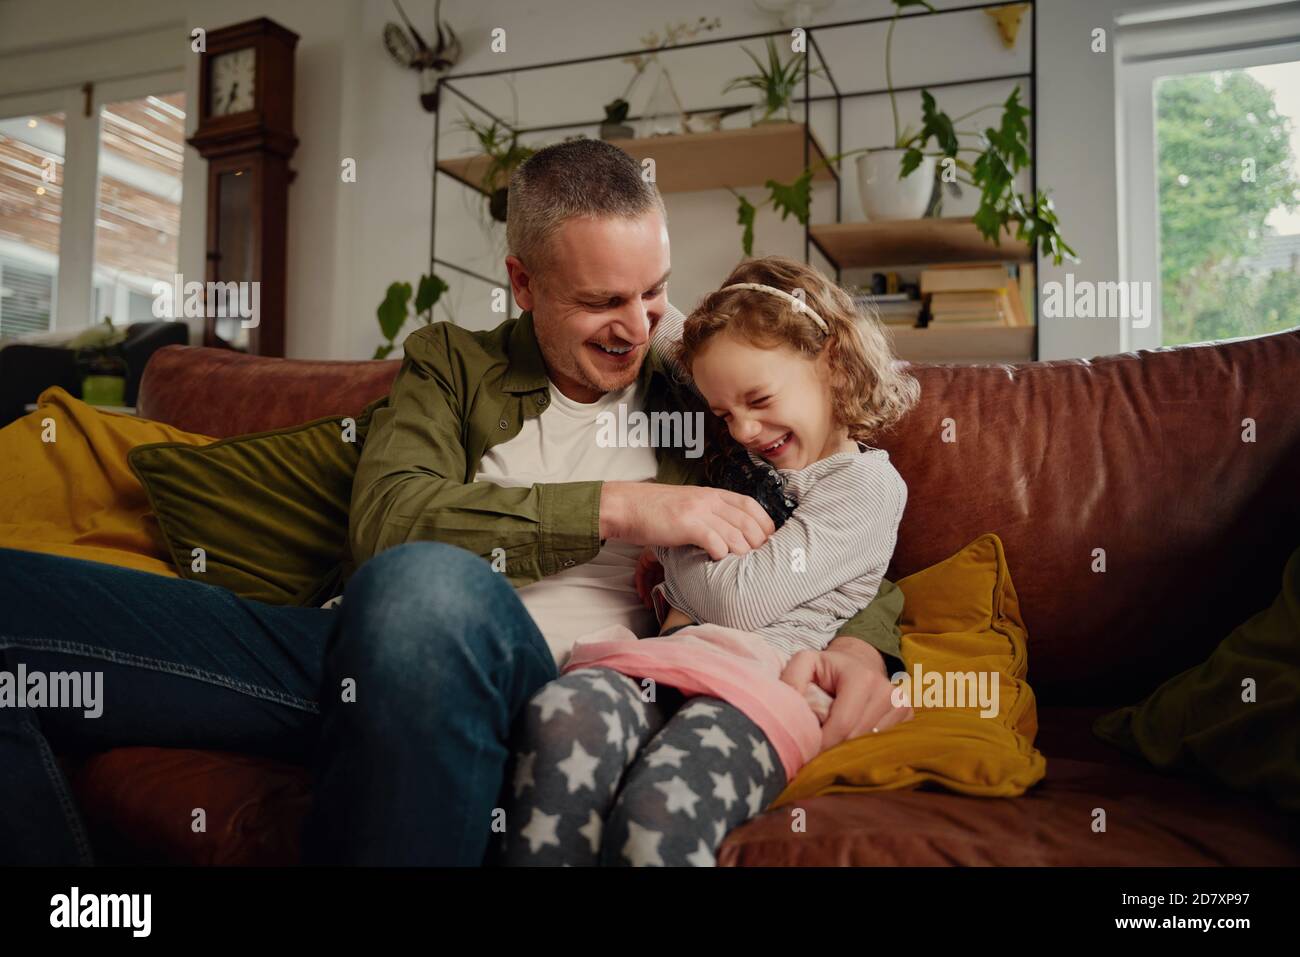 Playful father and daughter tickling each other while relaxing on sofa at home Stock Photo